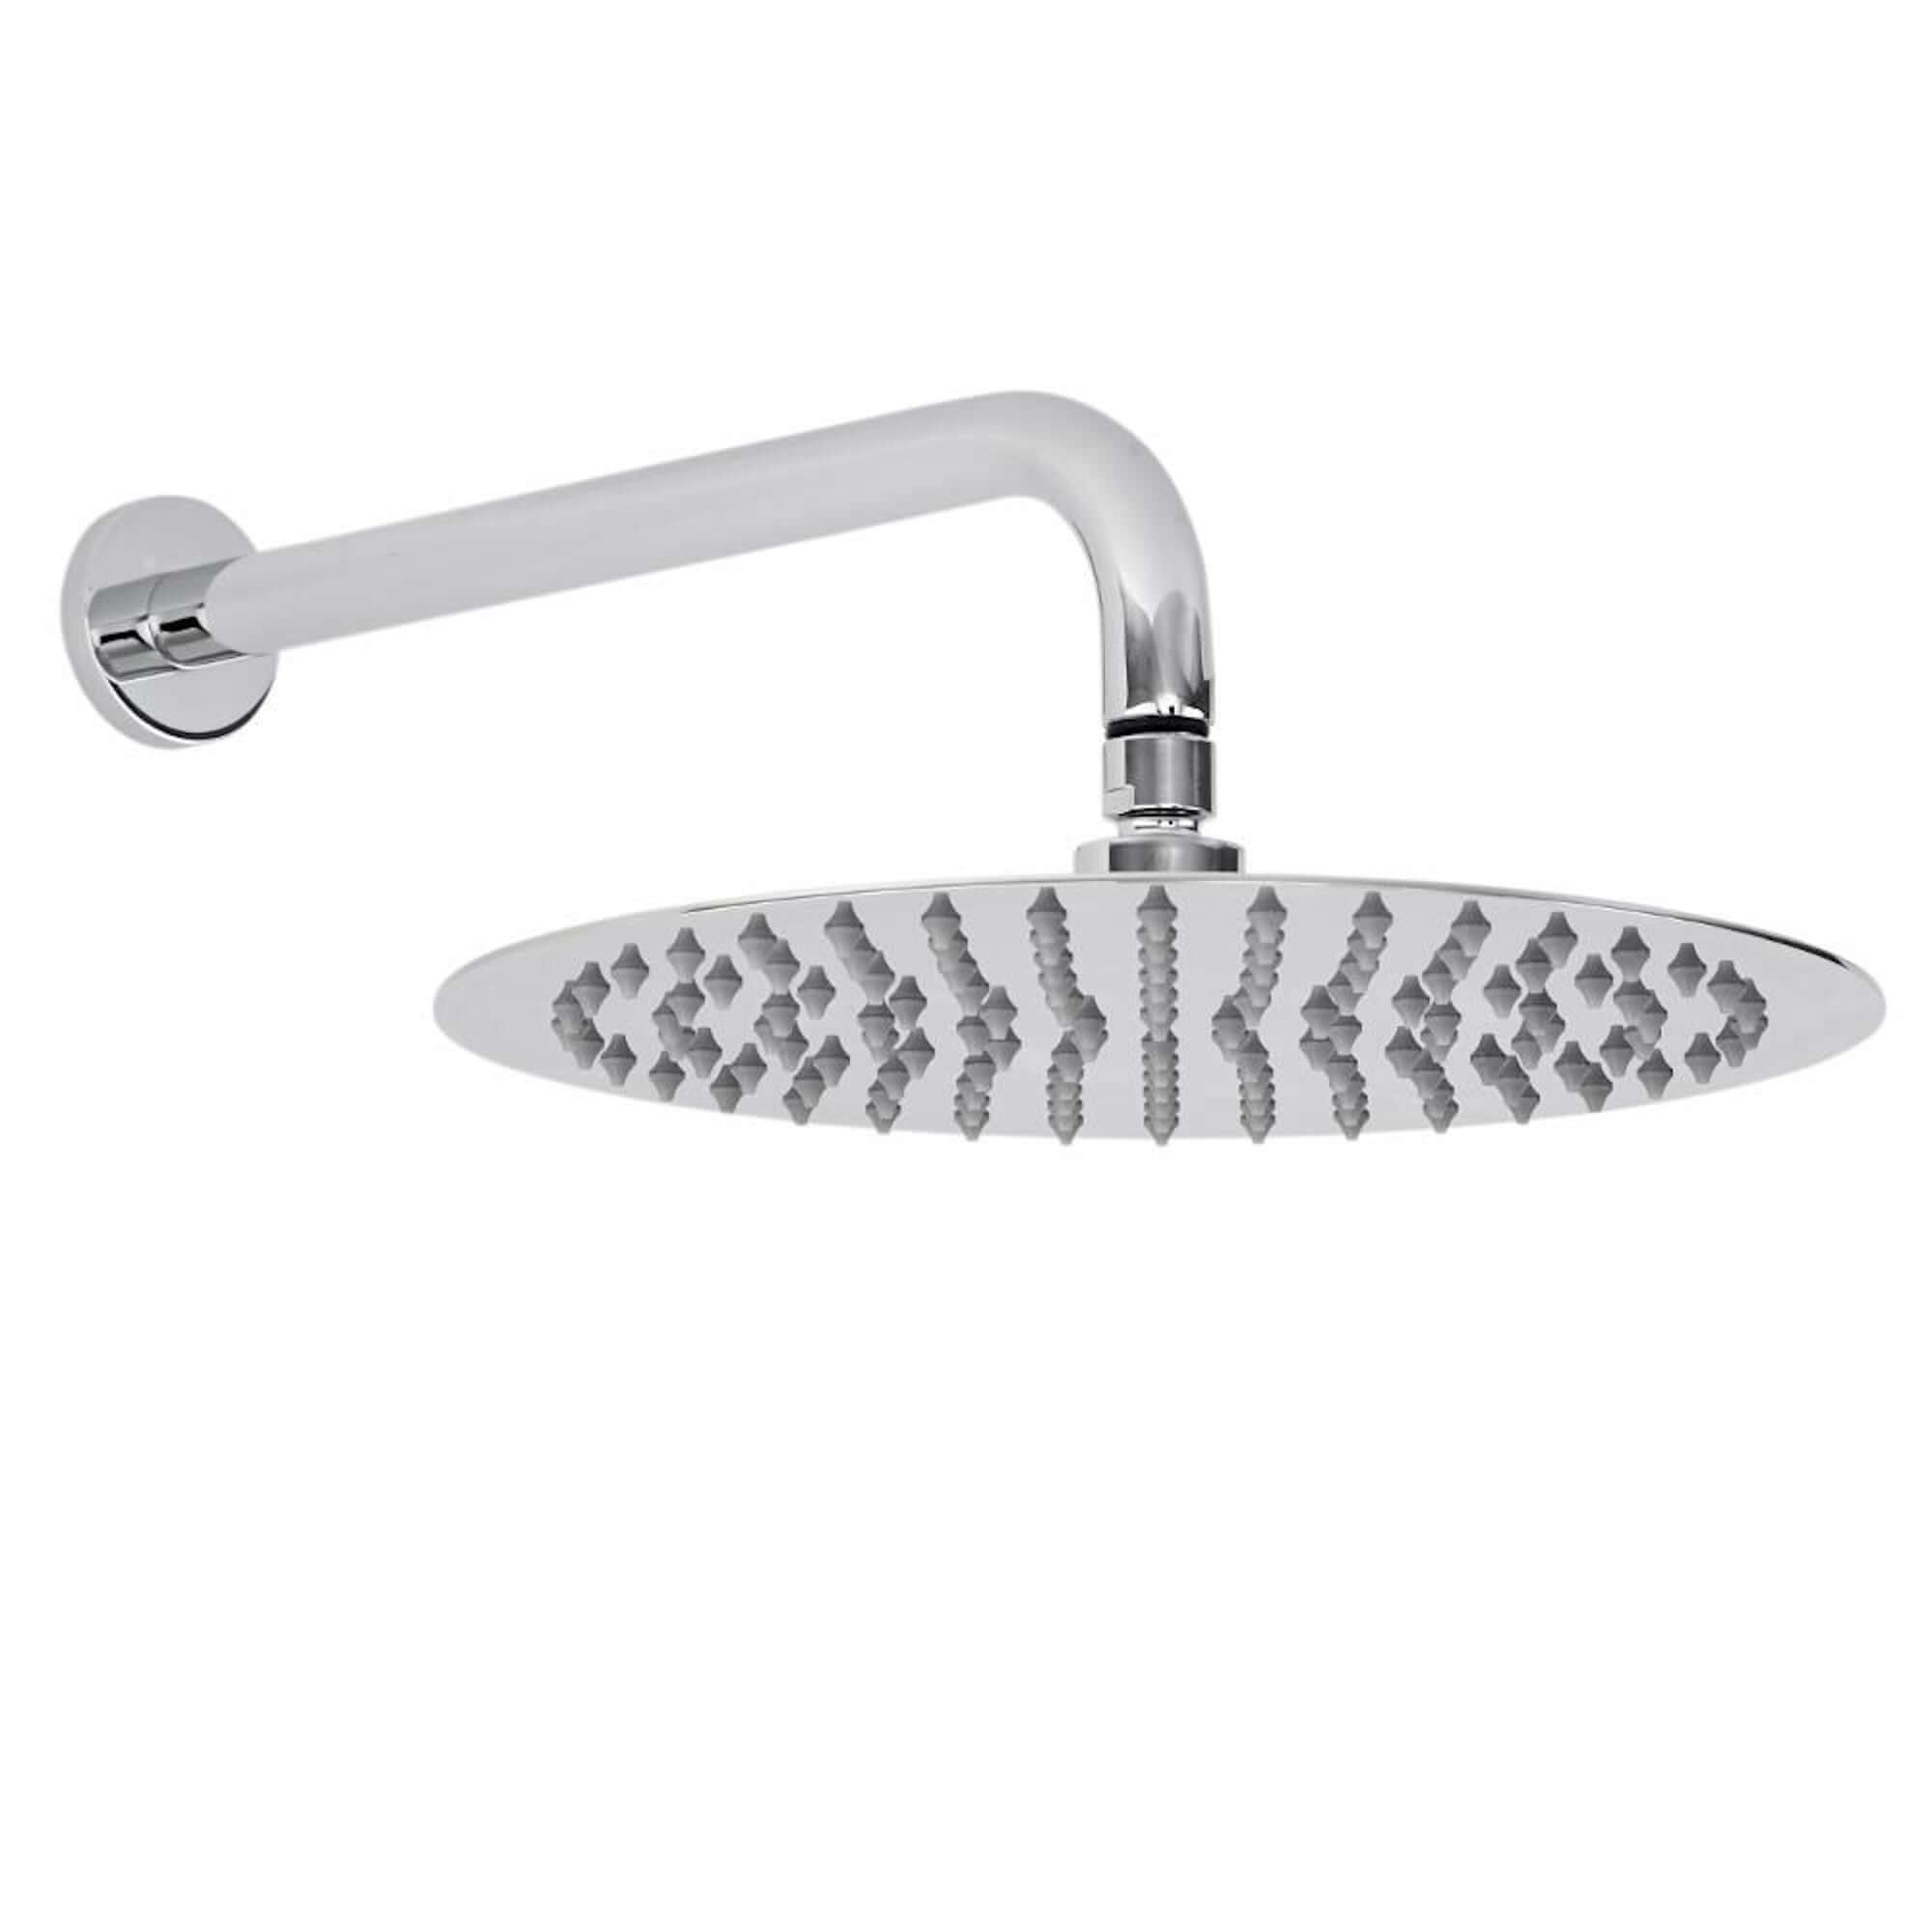 Contemporary Wall Fixed Round Ultra Slim Stainless Steel Shower Head 12" With Shower Arm - Chrome